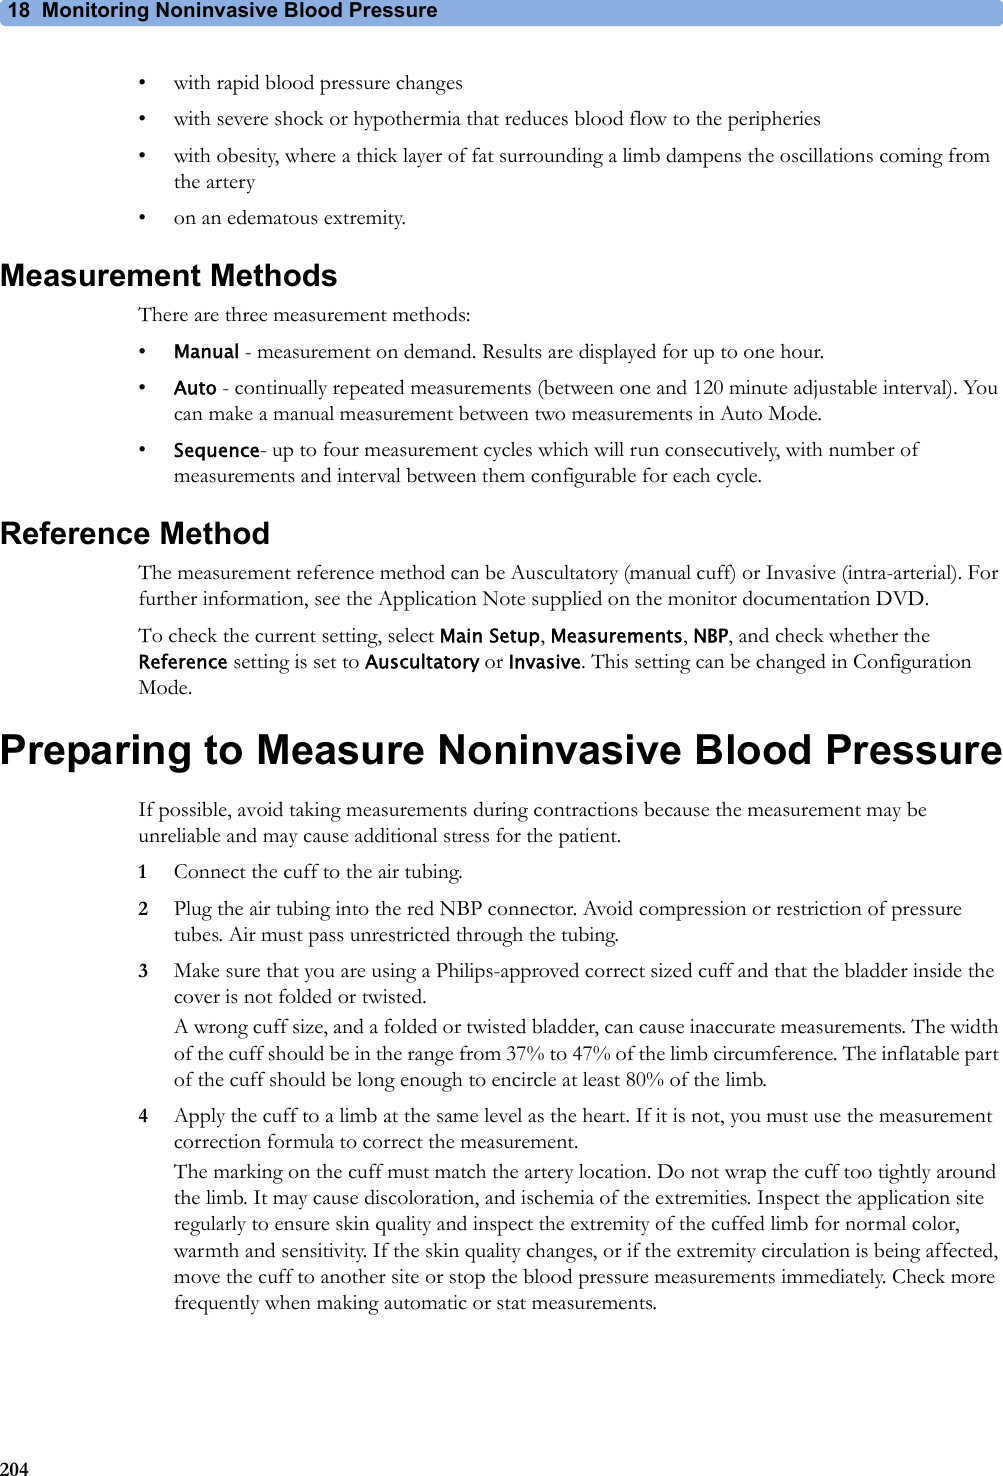 18 Monitoring Noninvasive Blood Pressure204• with rapid blood pressure changes• with severe shock or hypothermia that reduces blood flow to the peripheries• with obesity, where a thick layer of fat surrounding a limb dampens the oscillations coming from the artery• on an edematous extremity.Measurement MethodsThere are three measurement methods:•Manual - measurement on demand. Results are displayed for up to one hour.•Auto - continually repeated measurements (between one and 120 minute adjustable interval). You can make a manual measurement between two measurements in Auto Mode.•Sequence- up to four measurement cycles which will run consecutively, with number of measurements and interval between them configurable for each cycle.Reference MethodThe measurement reference method can be Auscultatory (manual cuff) or Invasive (intra-arterial). For further information, see the Application Note supplied on the monitor documentation DVD.To check the current setting, select Main Setup, Measurements, NBP, and check whether the Reference setting is set to Auscultatory or Invasive. This setting can be changed in Configuration Mode.Preparing to Measure Noninvasive Blood PressureIf possible, avoid taking measurements during contractions because the measurement may be unreliable and may cause additional stress for the patient.1Connect the cuff to the air tubing.2Plug the air tubing into the red NBP connector. Avoid compression or restriction of pressure tubes. Air must pass unrestricted through the tubing.3Make sure that you are using a Philips-approved correct sized cuff and that the bladder inside the cover is not folded or twisted.A wrong cuff size, and a folded or twisted bladder, can cause inaccurate measurements. The width of the cuff should be in the range from 37% to 47% of the limb circumference. The inflatable part of the cuff should be long enough to encircle at least 80% of the limb.4Apply the cuff to a limb at the same level as the heart. If it is not, you must use the measurement correction formula to correct the measurement.The marking on the cuff must match the artery location. Do not wrap the cuff too tightly around the limb. It may cause discoloration, and ischemia of the extremities. Inspect the application site regularly to ensure skin quality and inspect the extremity of the cuffed limb for normal color, warmth and sensitivity. If the skin quality changes, or if the extremity circulation is being affected, move the cuff to another site or stop the blood pressure measurements immediately. Check more frequently when making automatic or stat measurements.